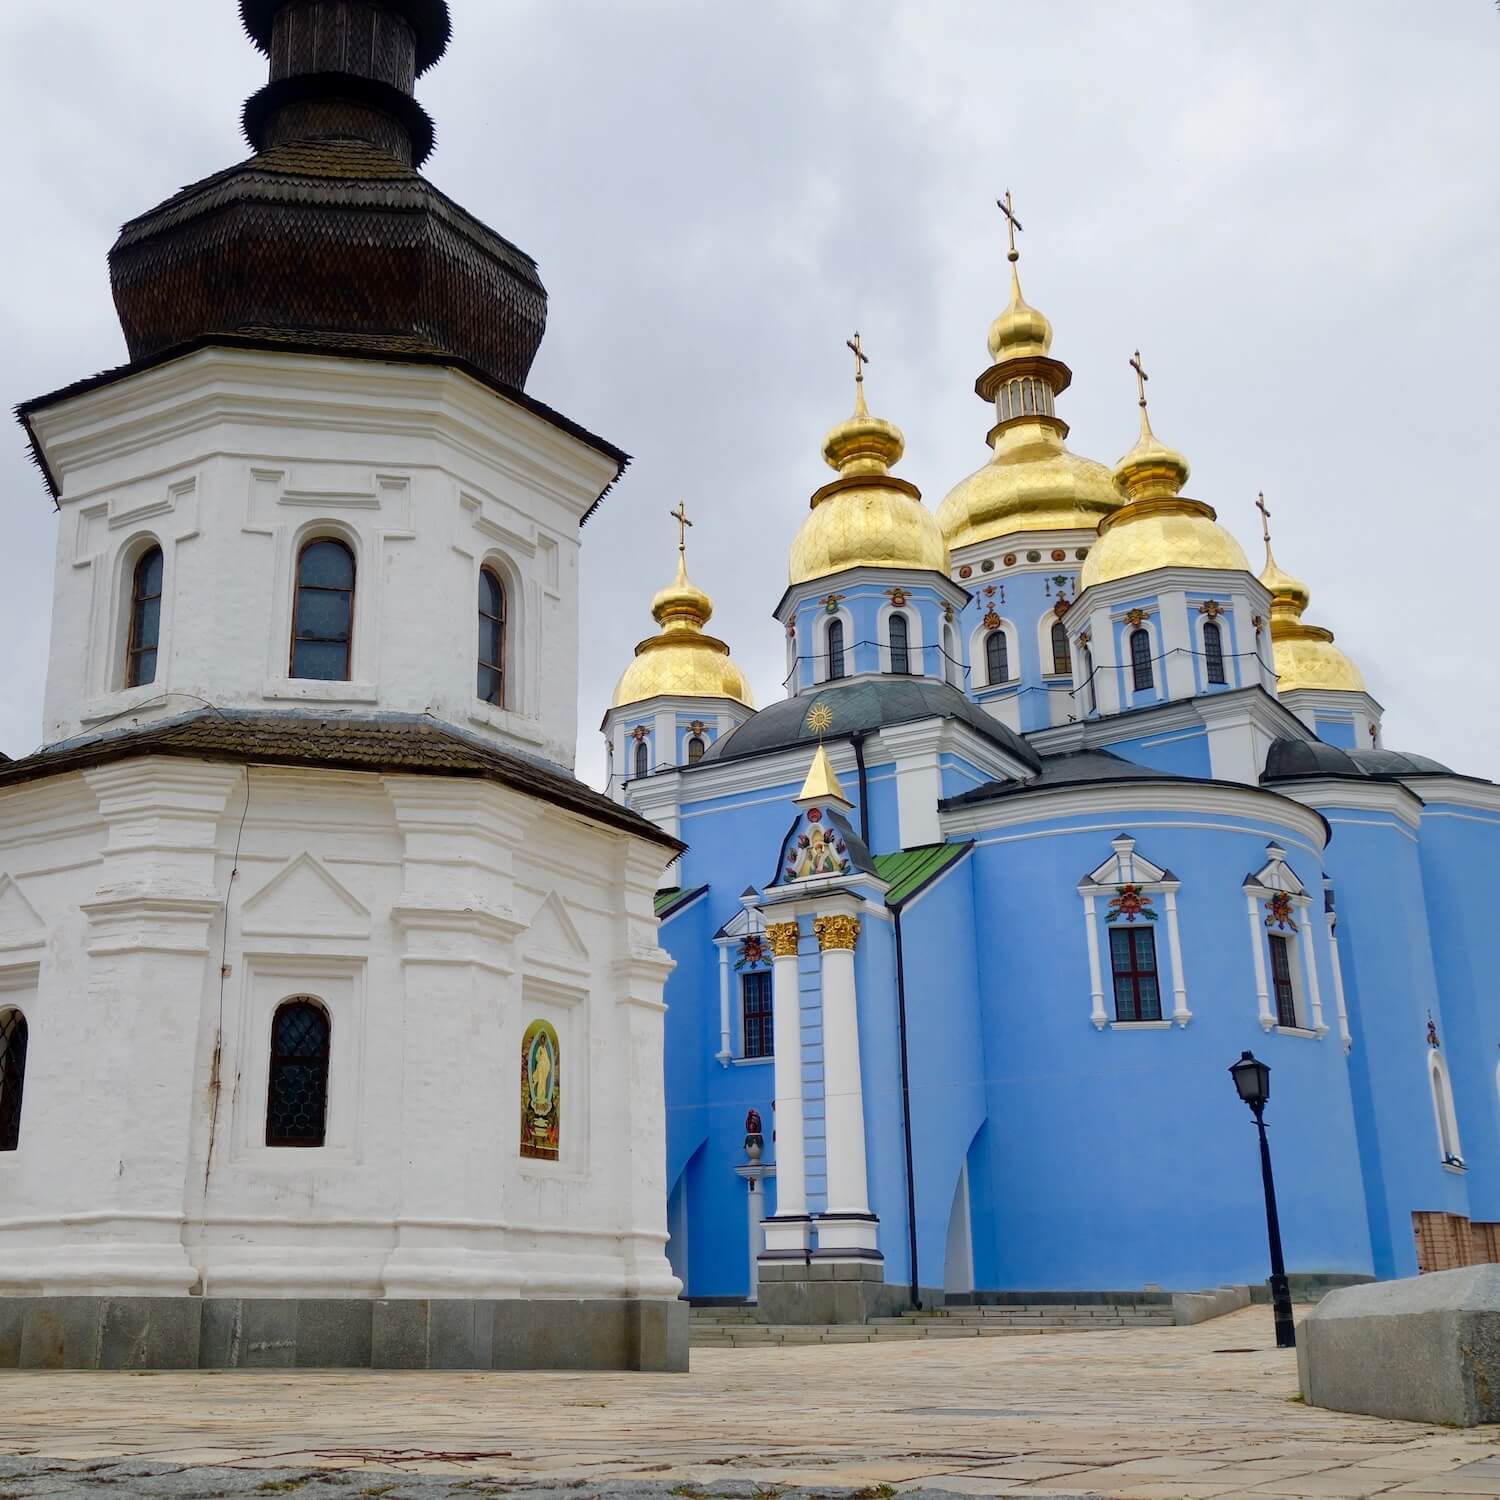 St. Michaels Monastery is one of the best was to experience Kiev in one day.  This complex of orthodox buildings includes the older wood church with white walls and black onion dome in the foreground and the bright blue main church with golden spires in the background.  